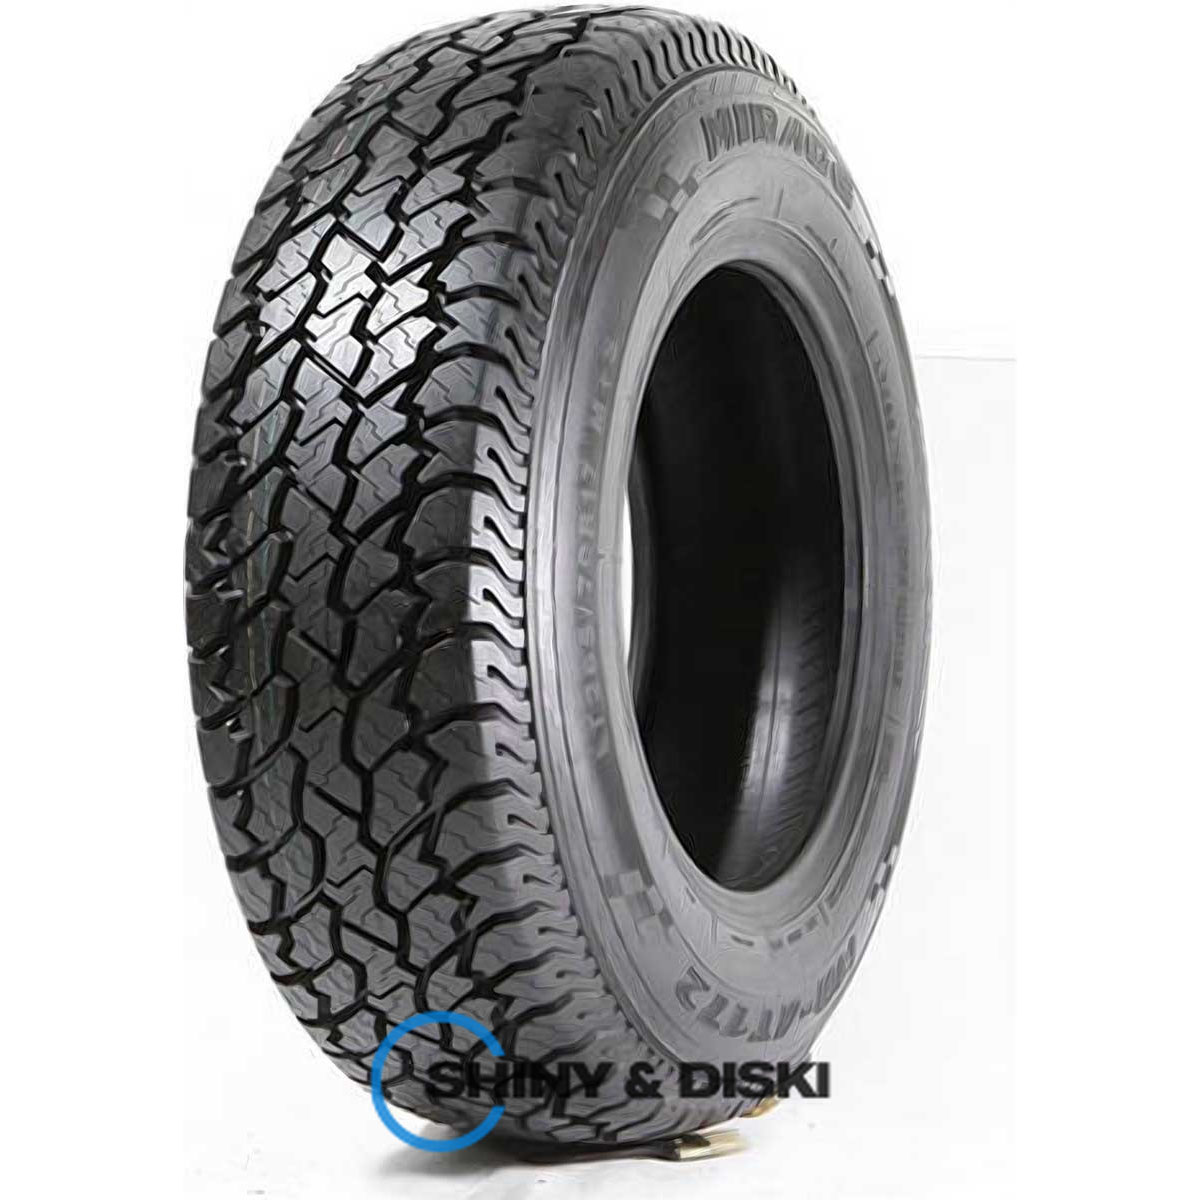 mirage mr-at172 245/75 r16 120/116s